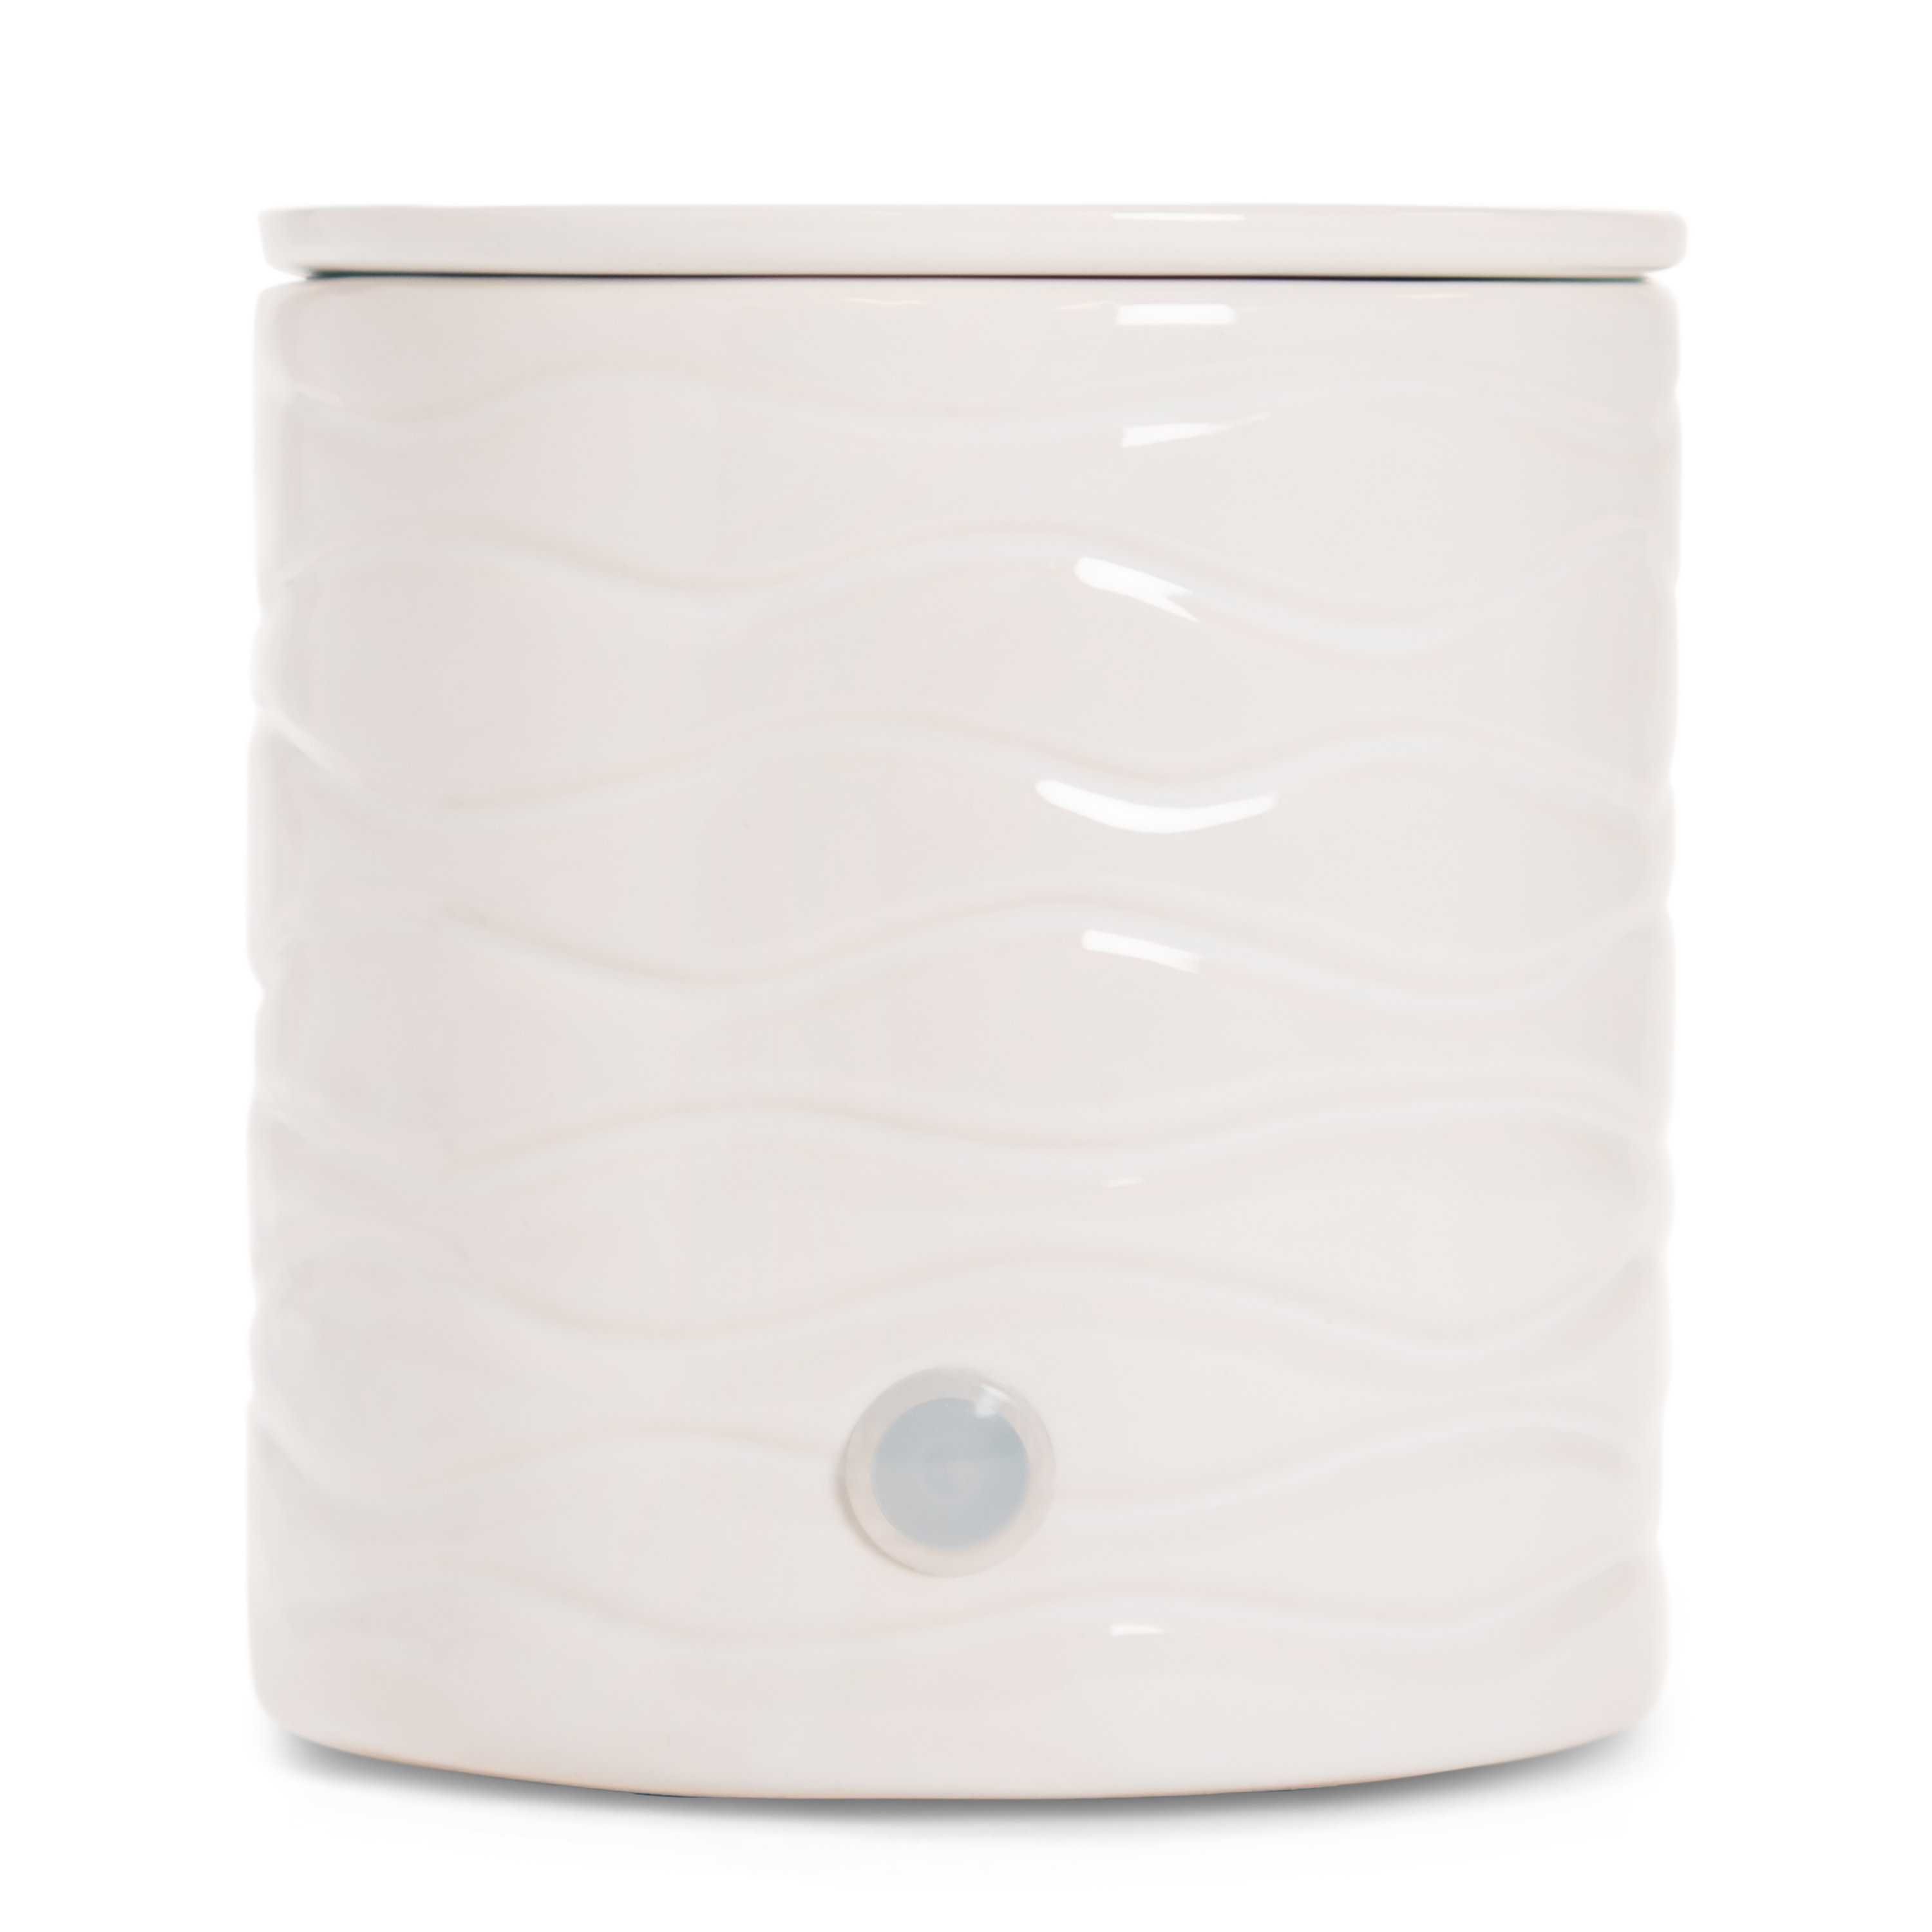 Mainstays Electric Wax Warmer, White, Single - image 1 of 6